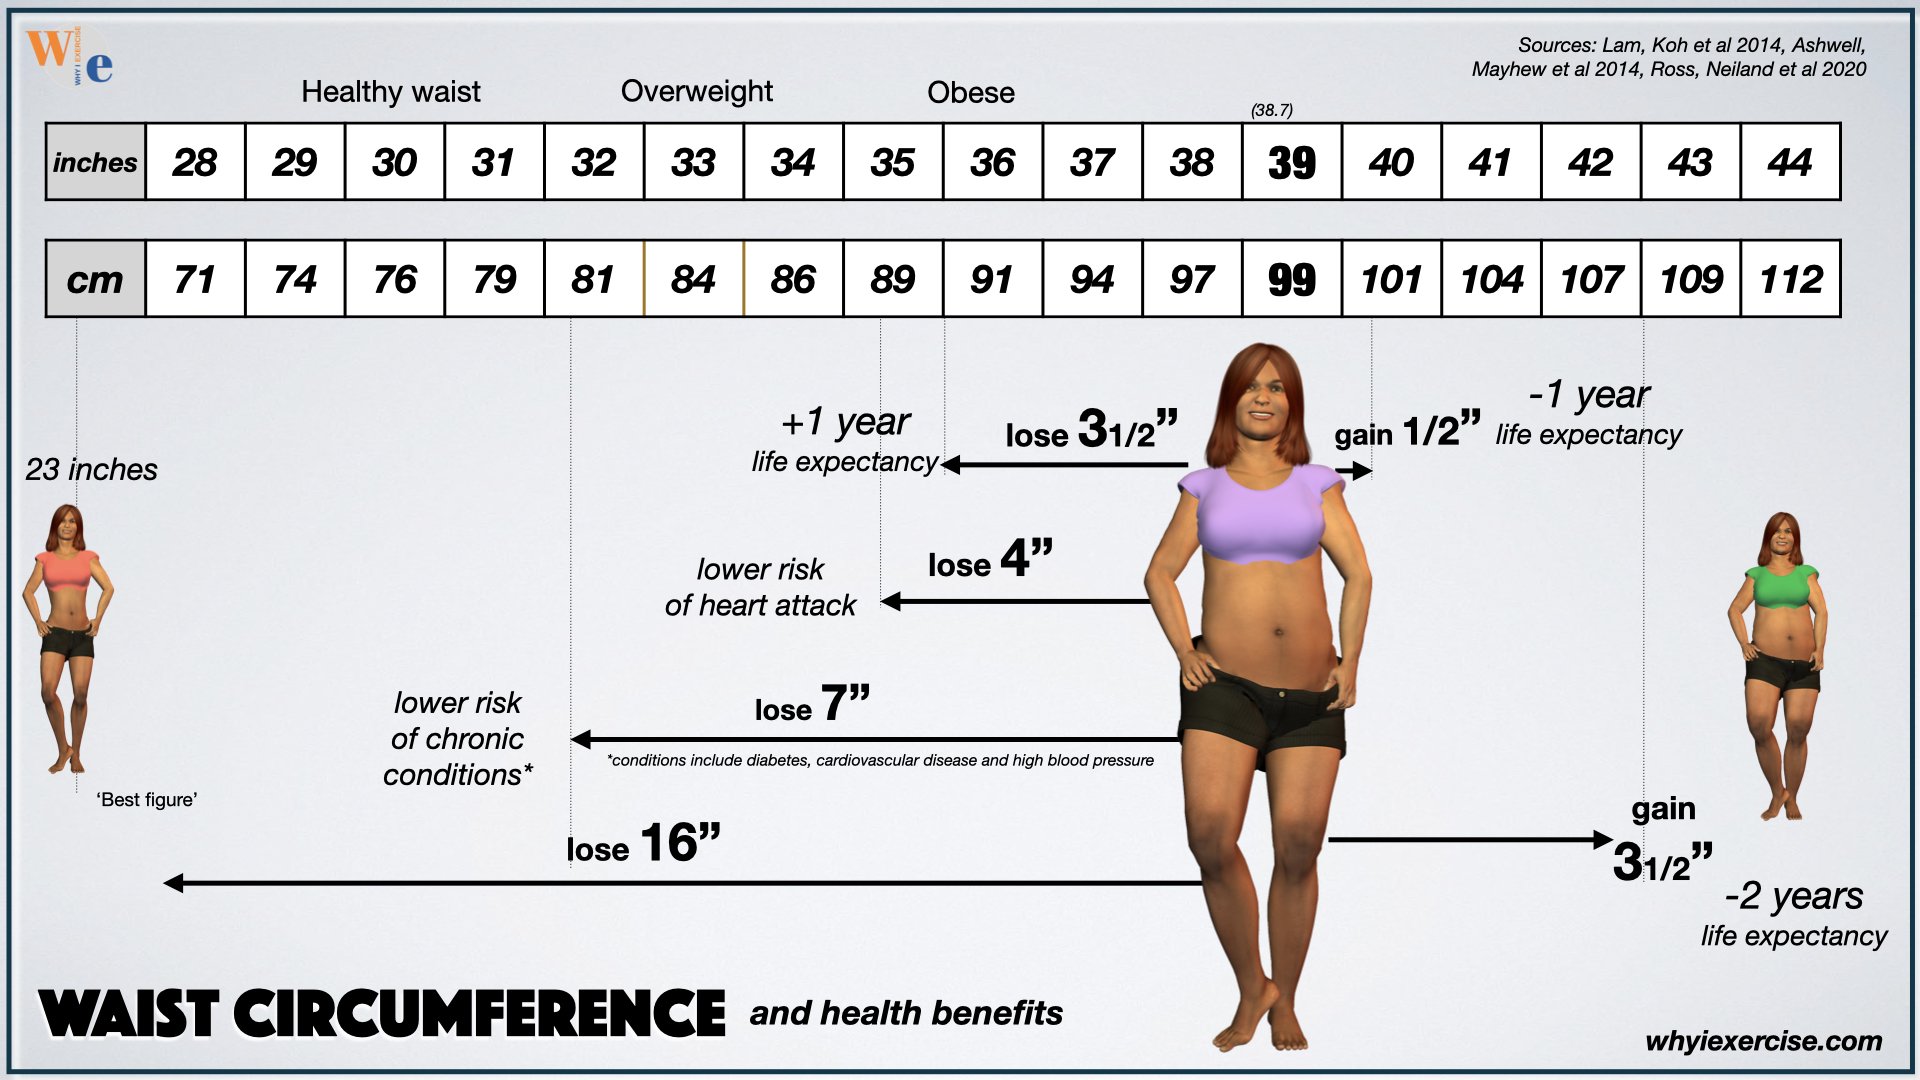 Waist circumference and health benefits for women 